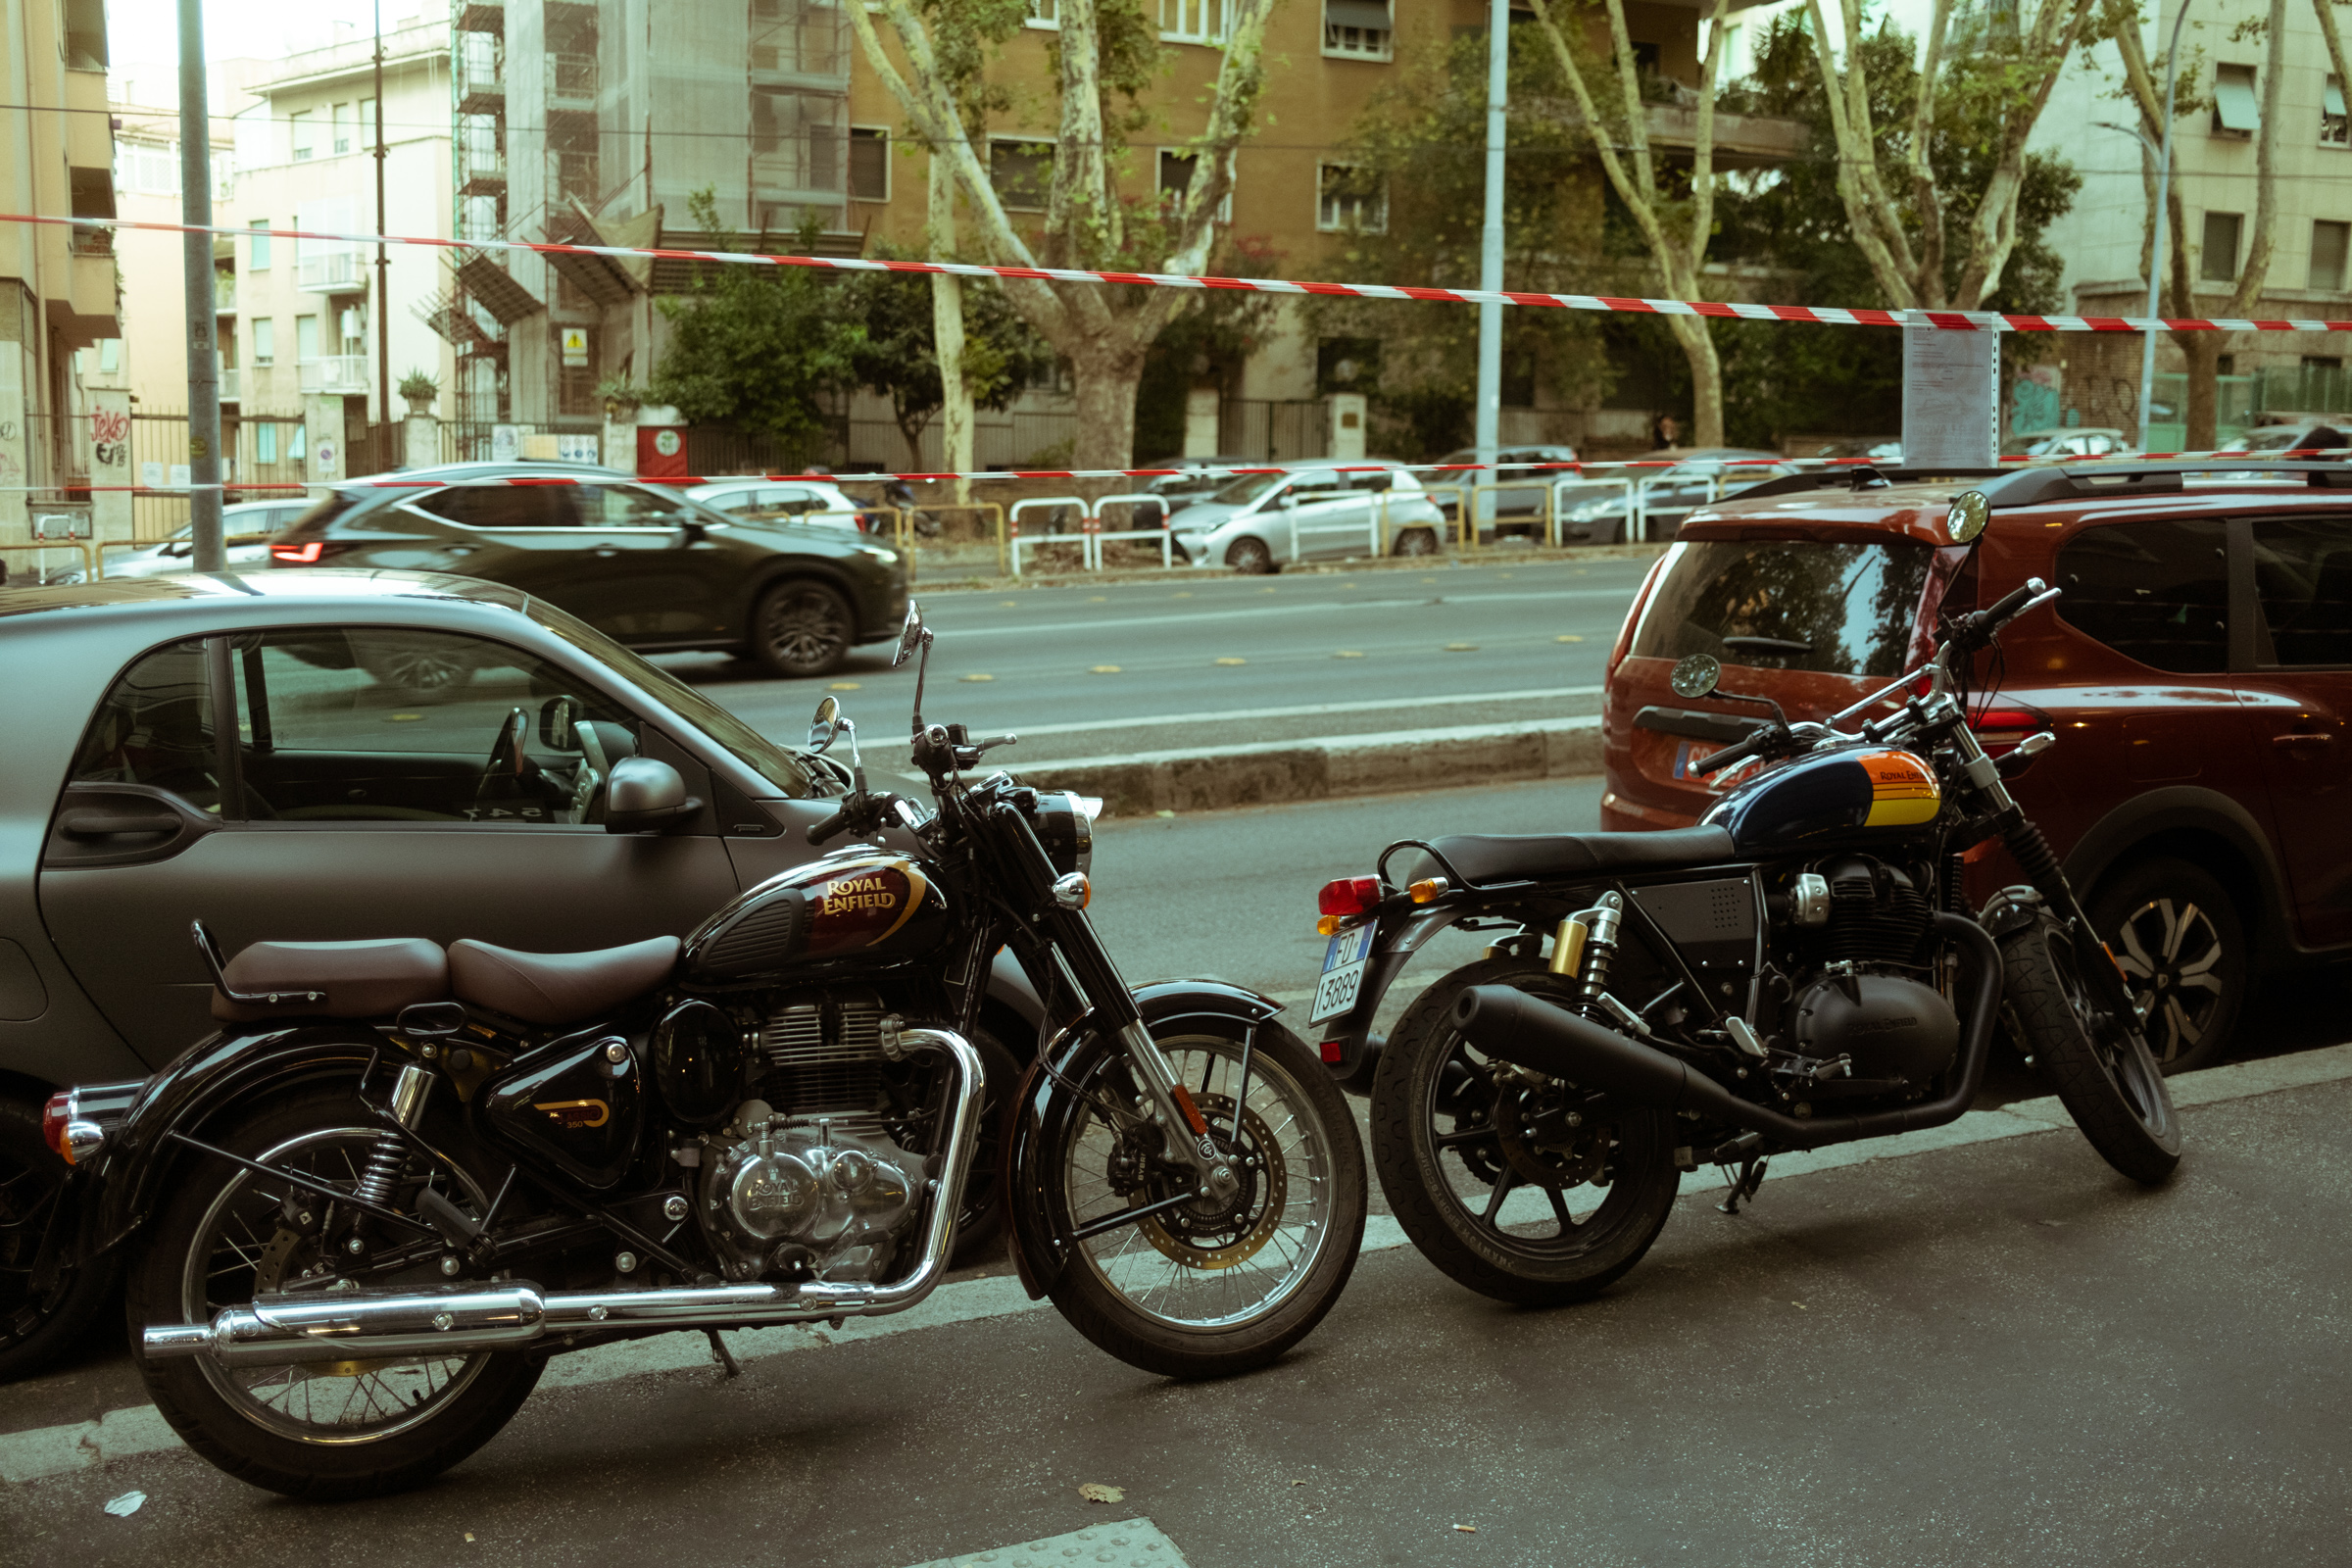 Two Royal Enfield motorcycles parked on a Rome street